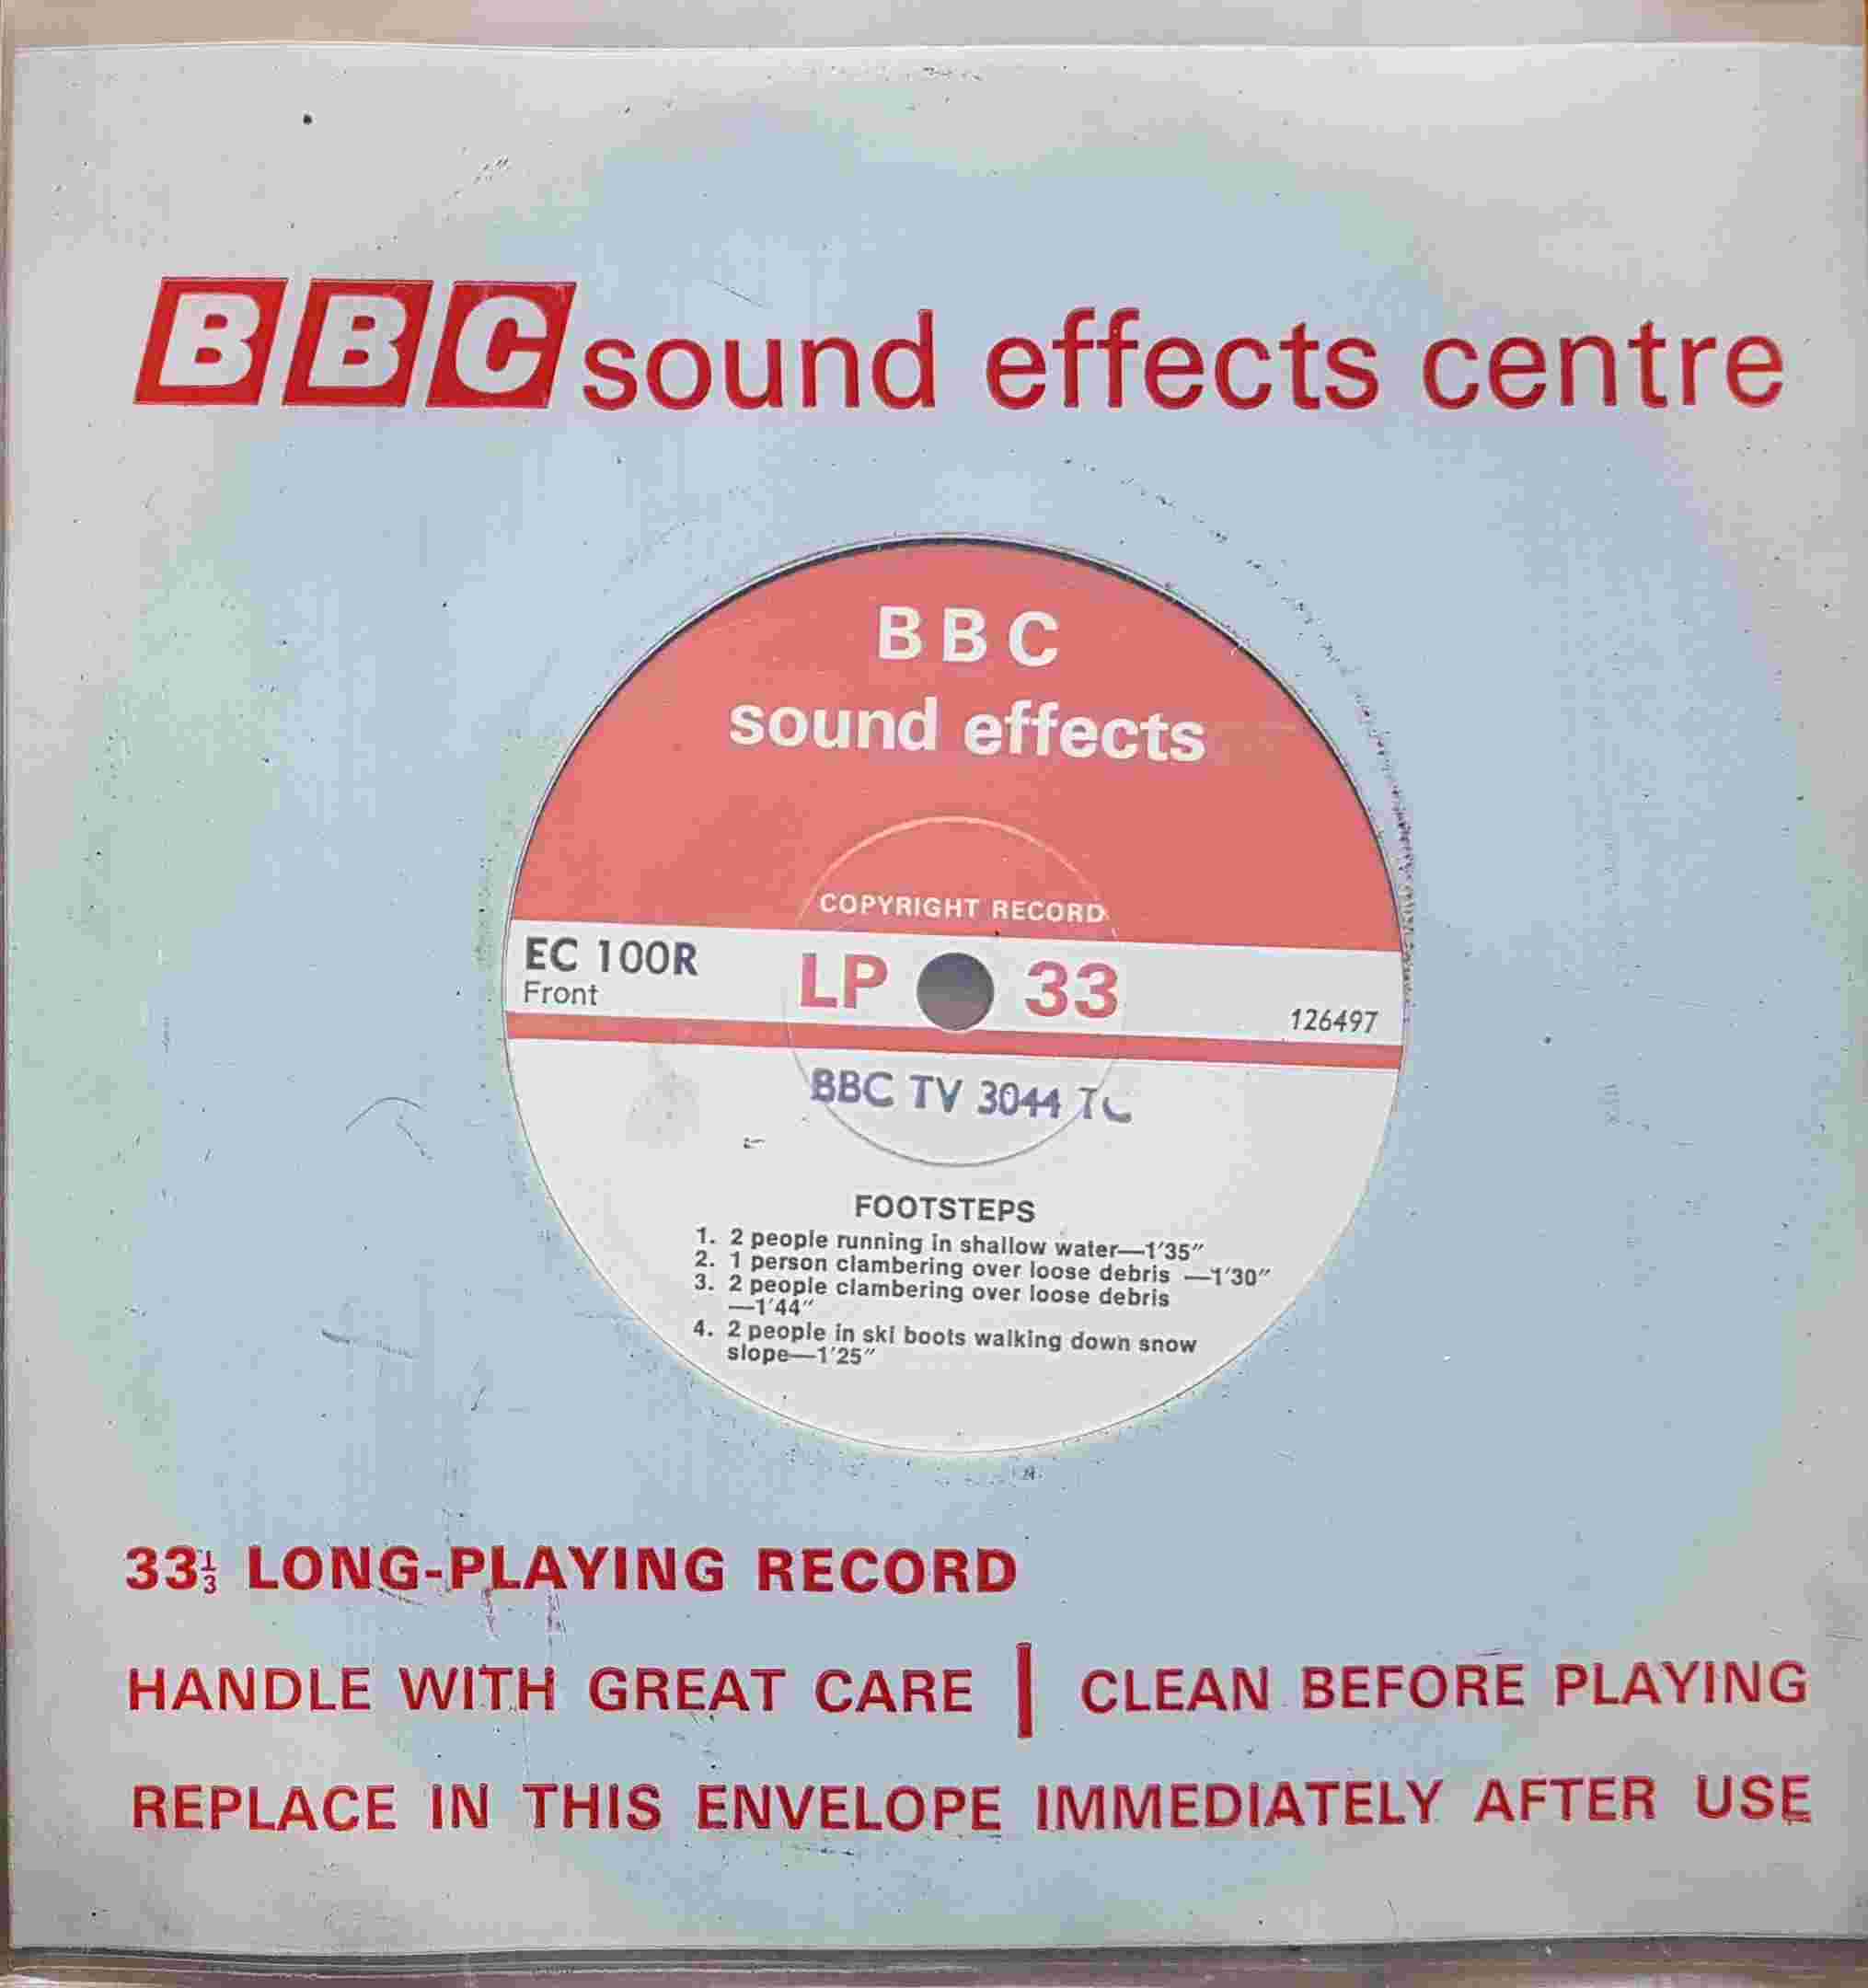 Picture of EC 100R Footsteps by artist Not registered from the BBC singles - Records and Tapes library